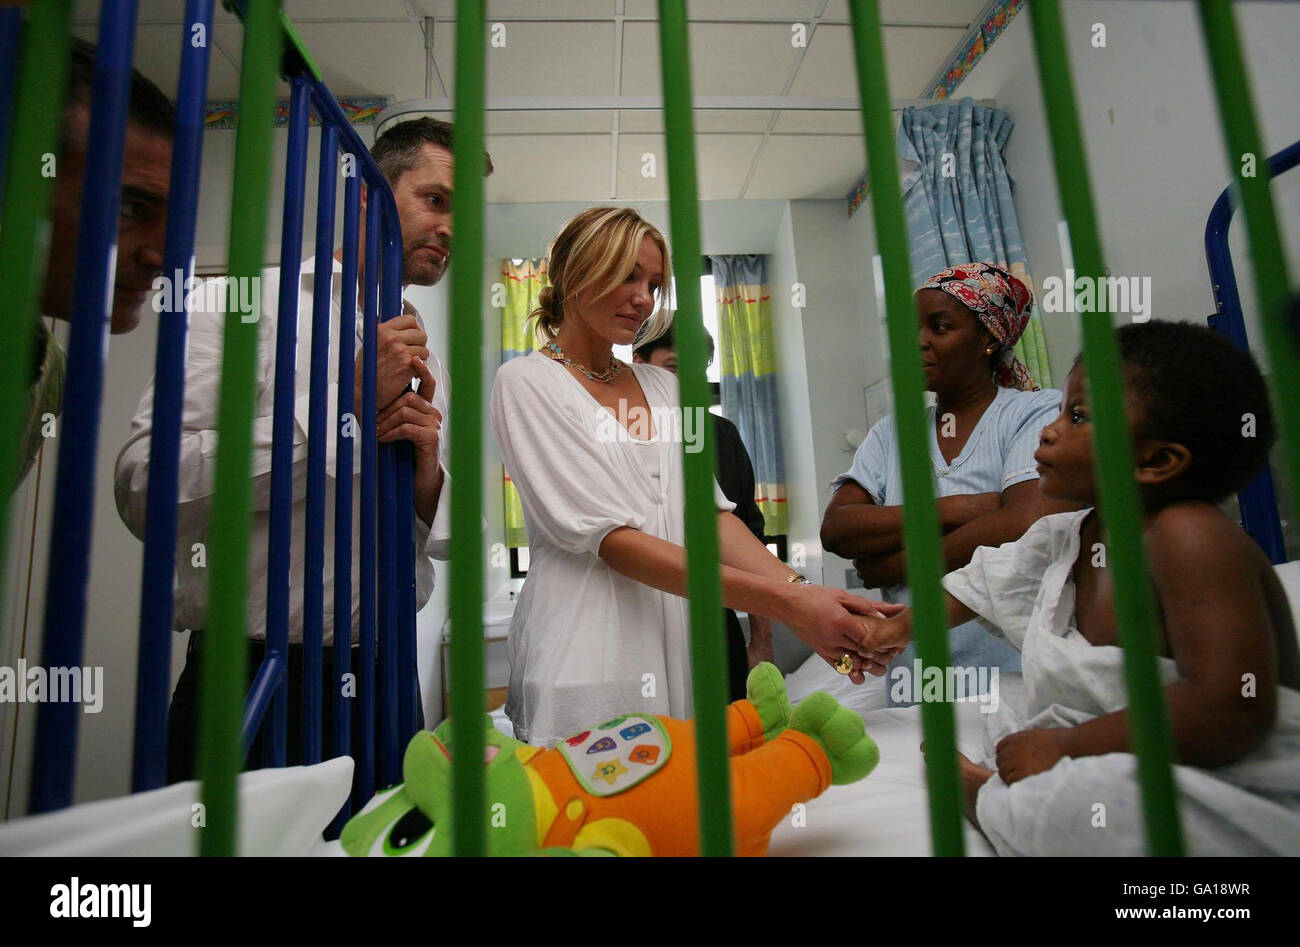 Stars of new film Shrek the Third (left to right); Antonio Banderas, Rupert Everett and Cameron Diaz greet young child Bilai during a surprise visit to Great Ormond Street Hospital in central London. Stock Photo